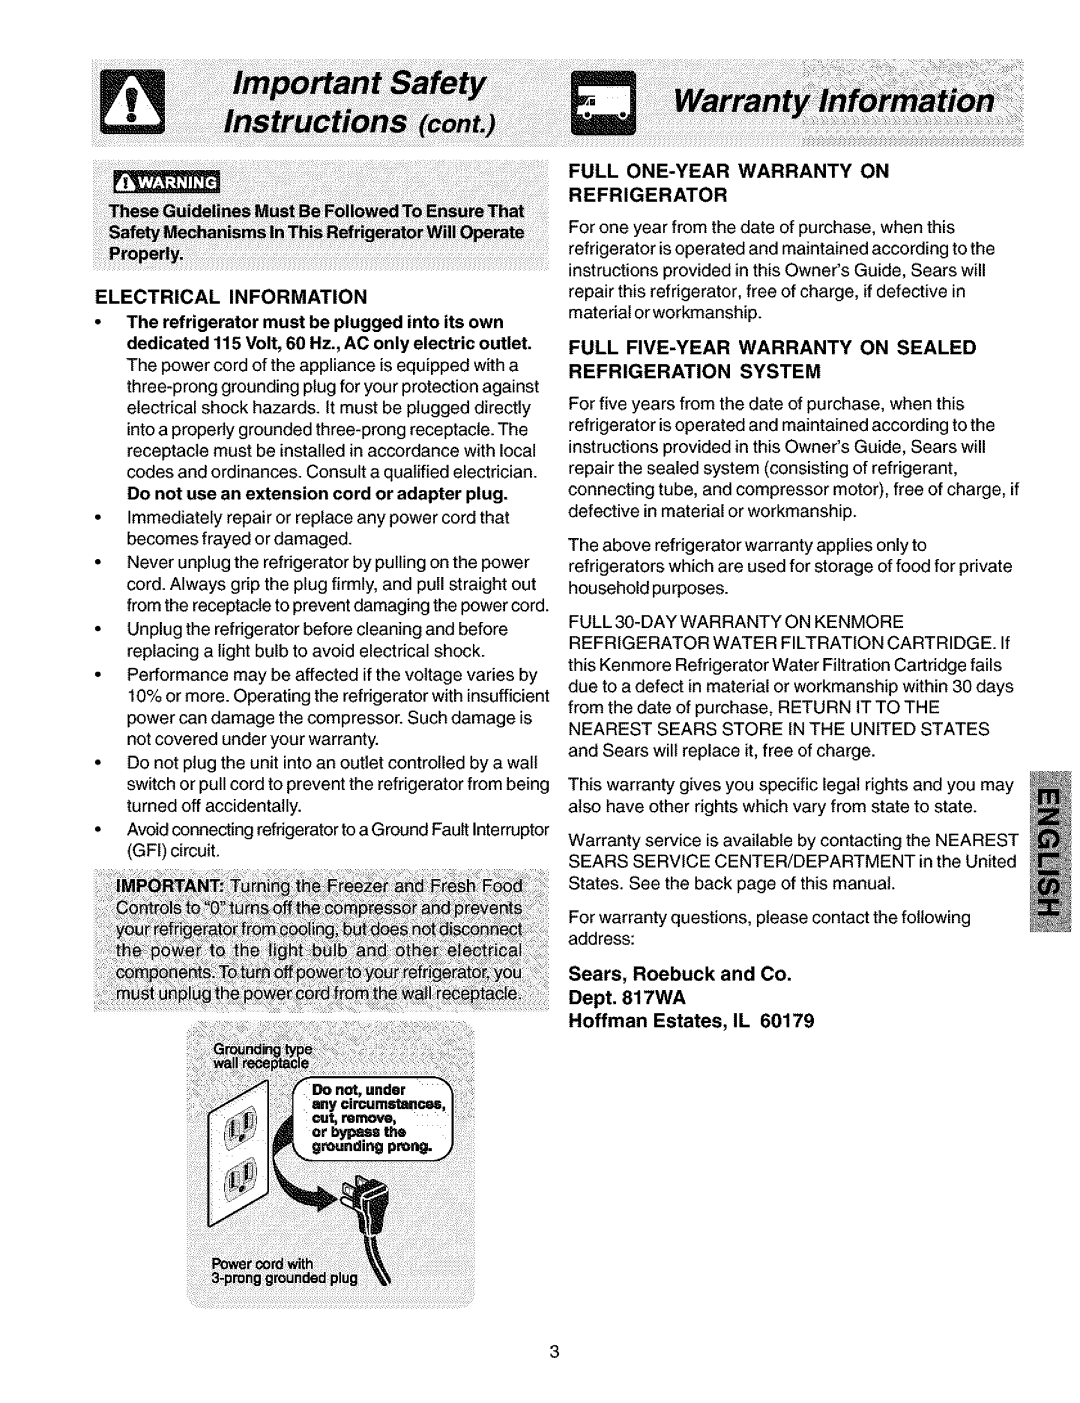 Kenmore 25352339202 Electrical Information, Do not use an extension cord or adapter plug, Full Five-Yearwarranty On Sealed 